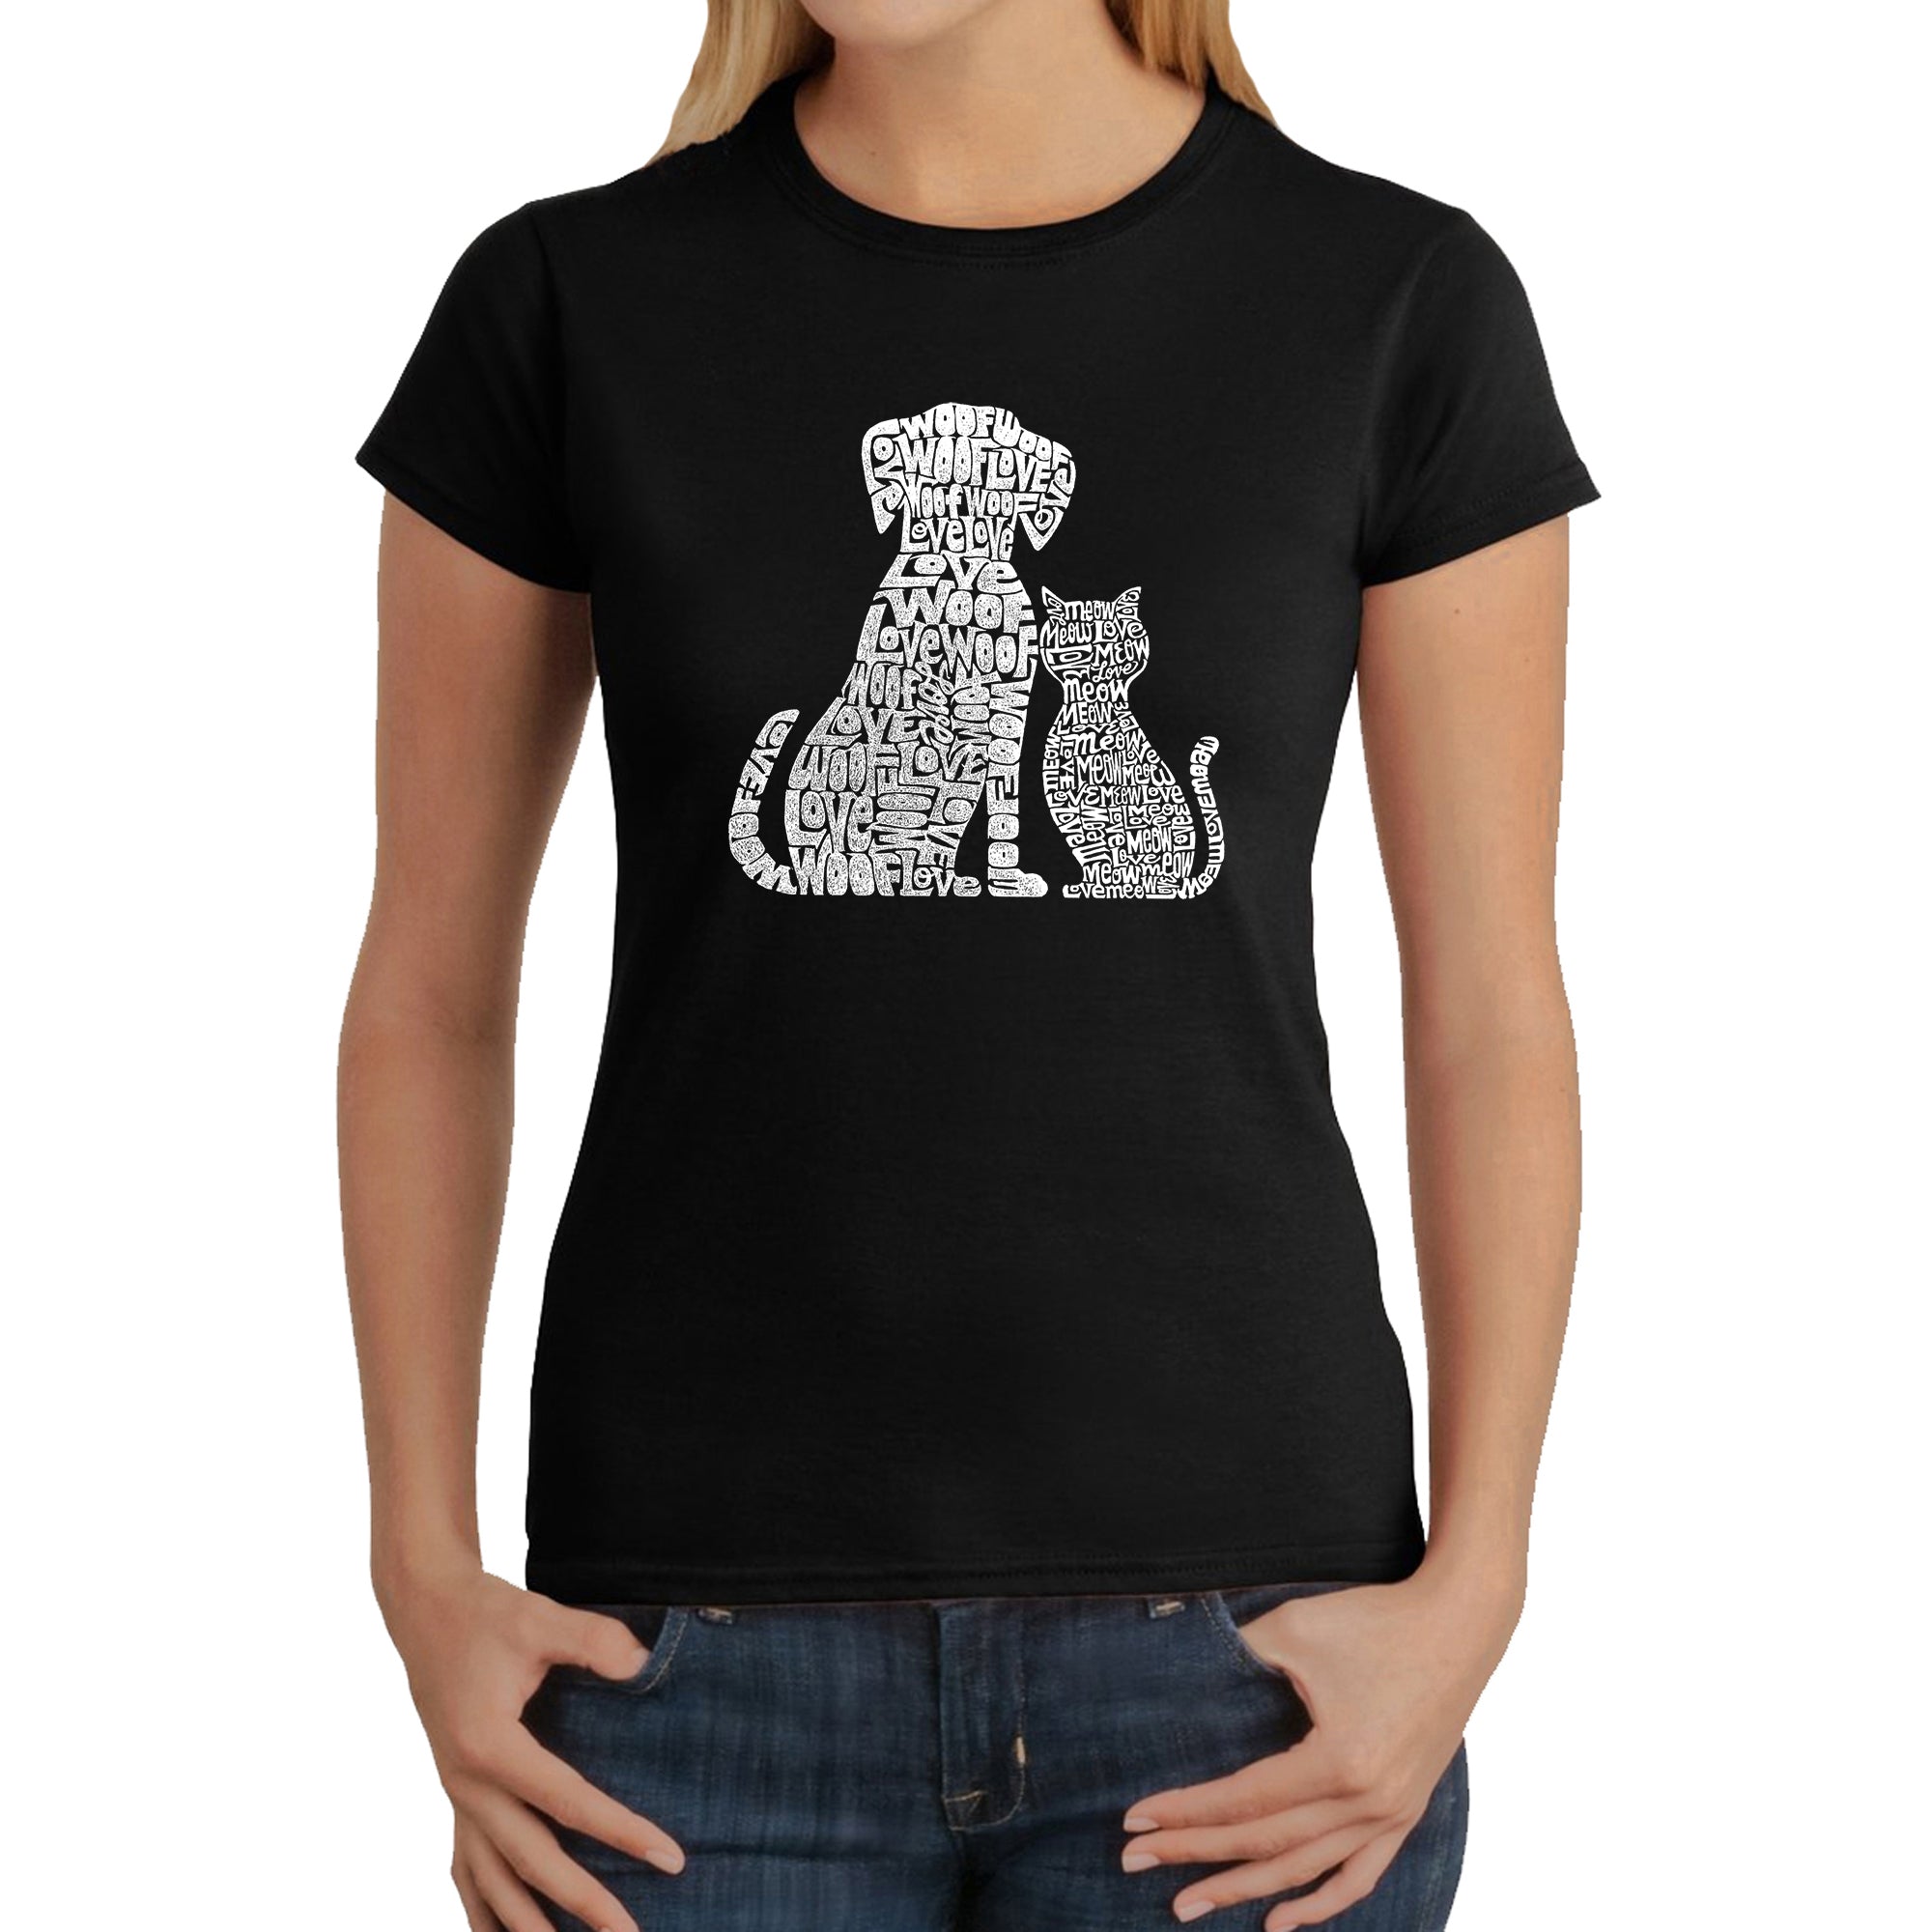 Dogs And Cats - Women's Word Art T-Shirt - Kelly - X-Large